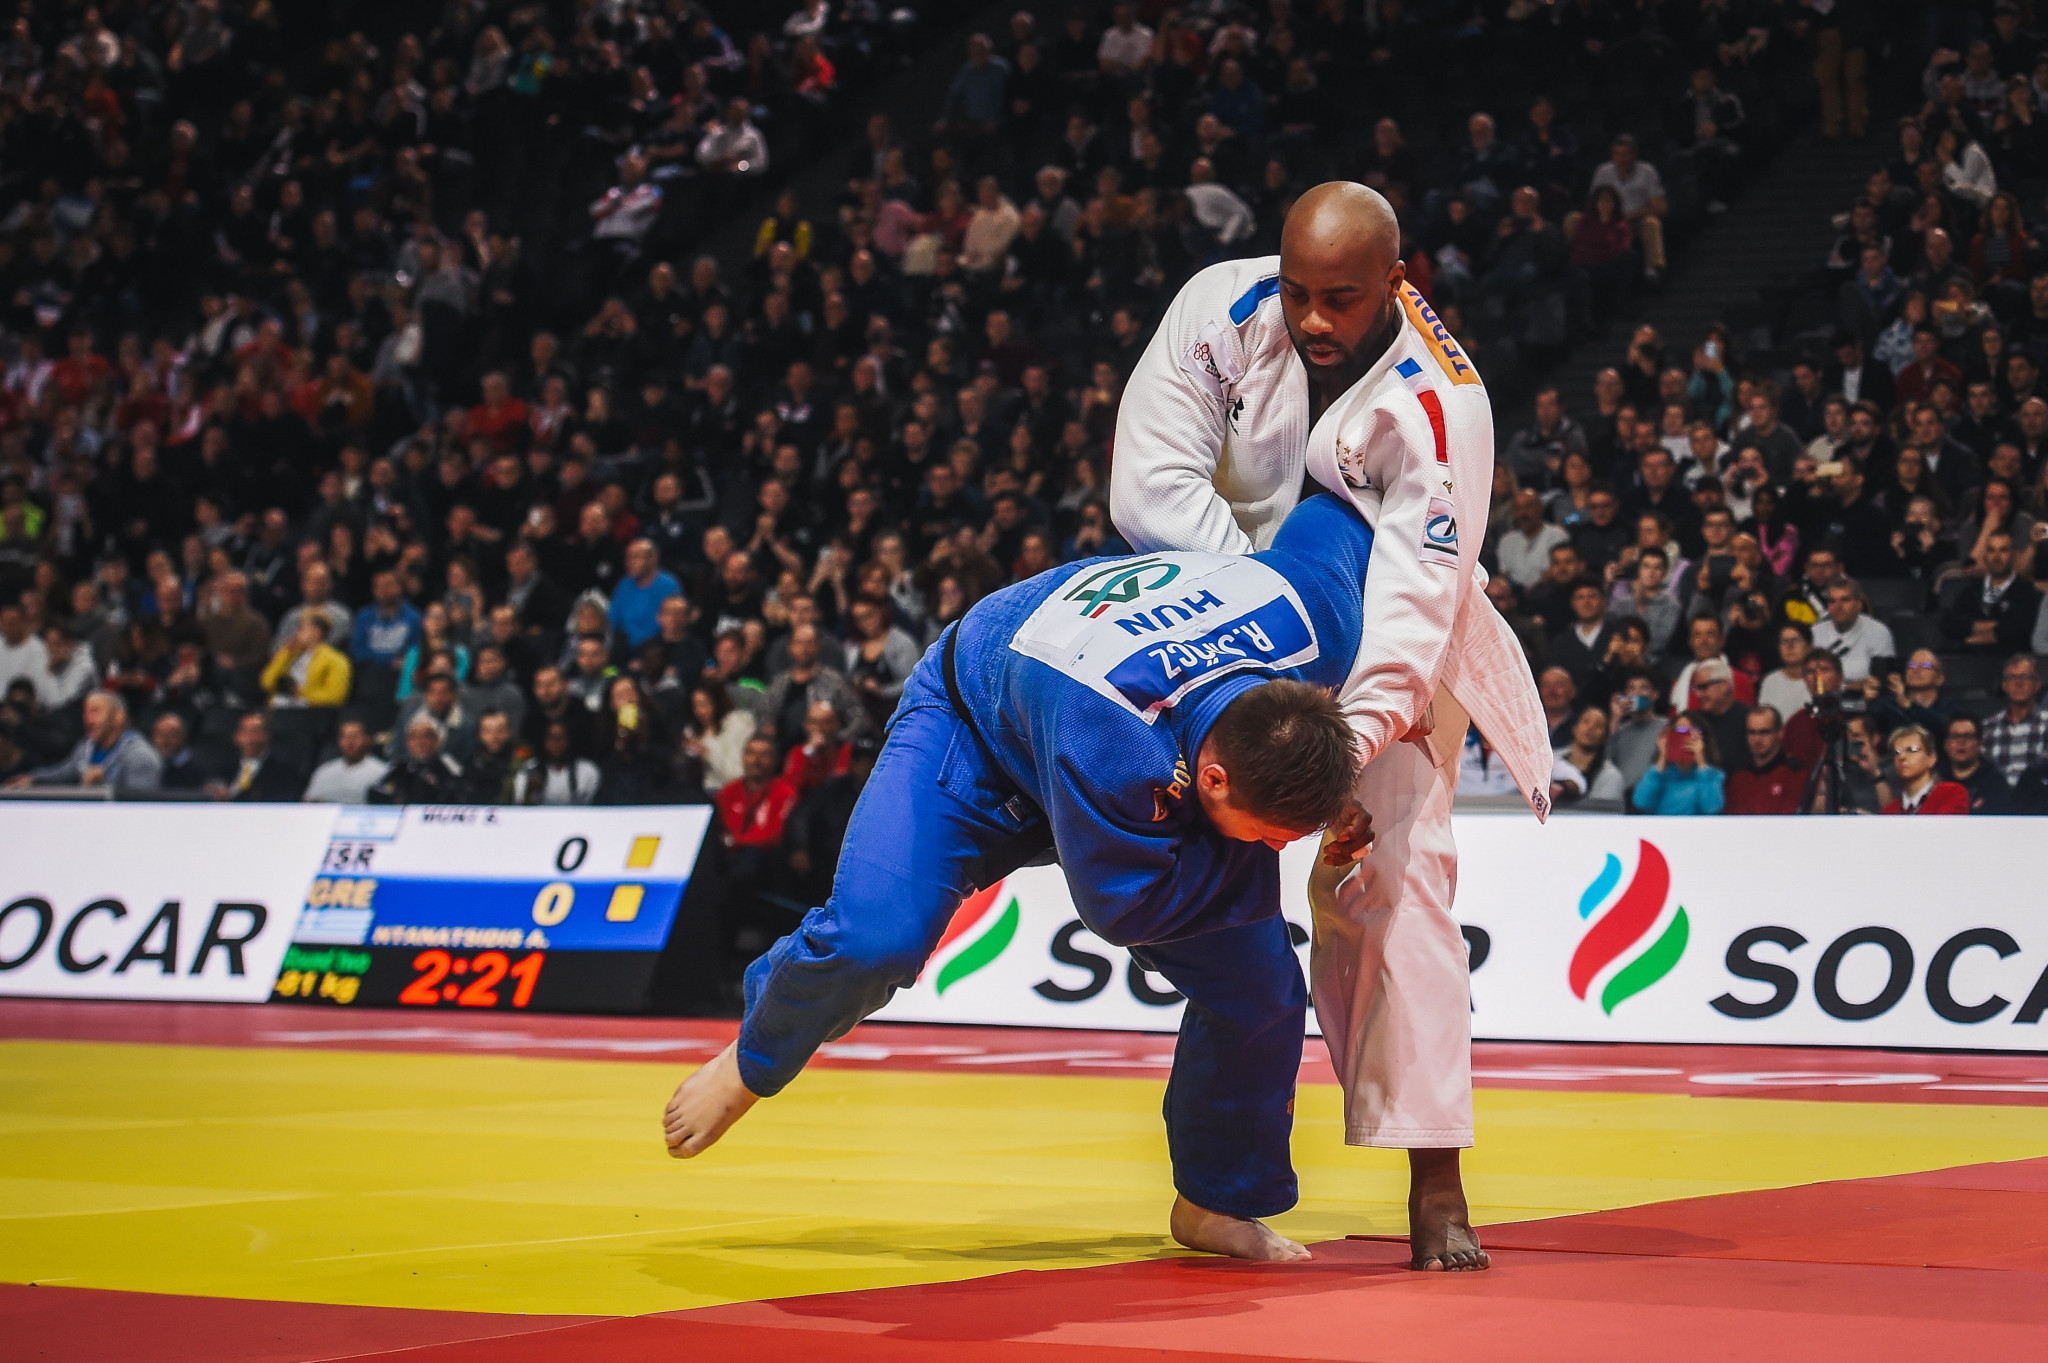 IJF confirms initial World Judo Tour schedule for 2022